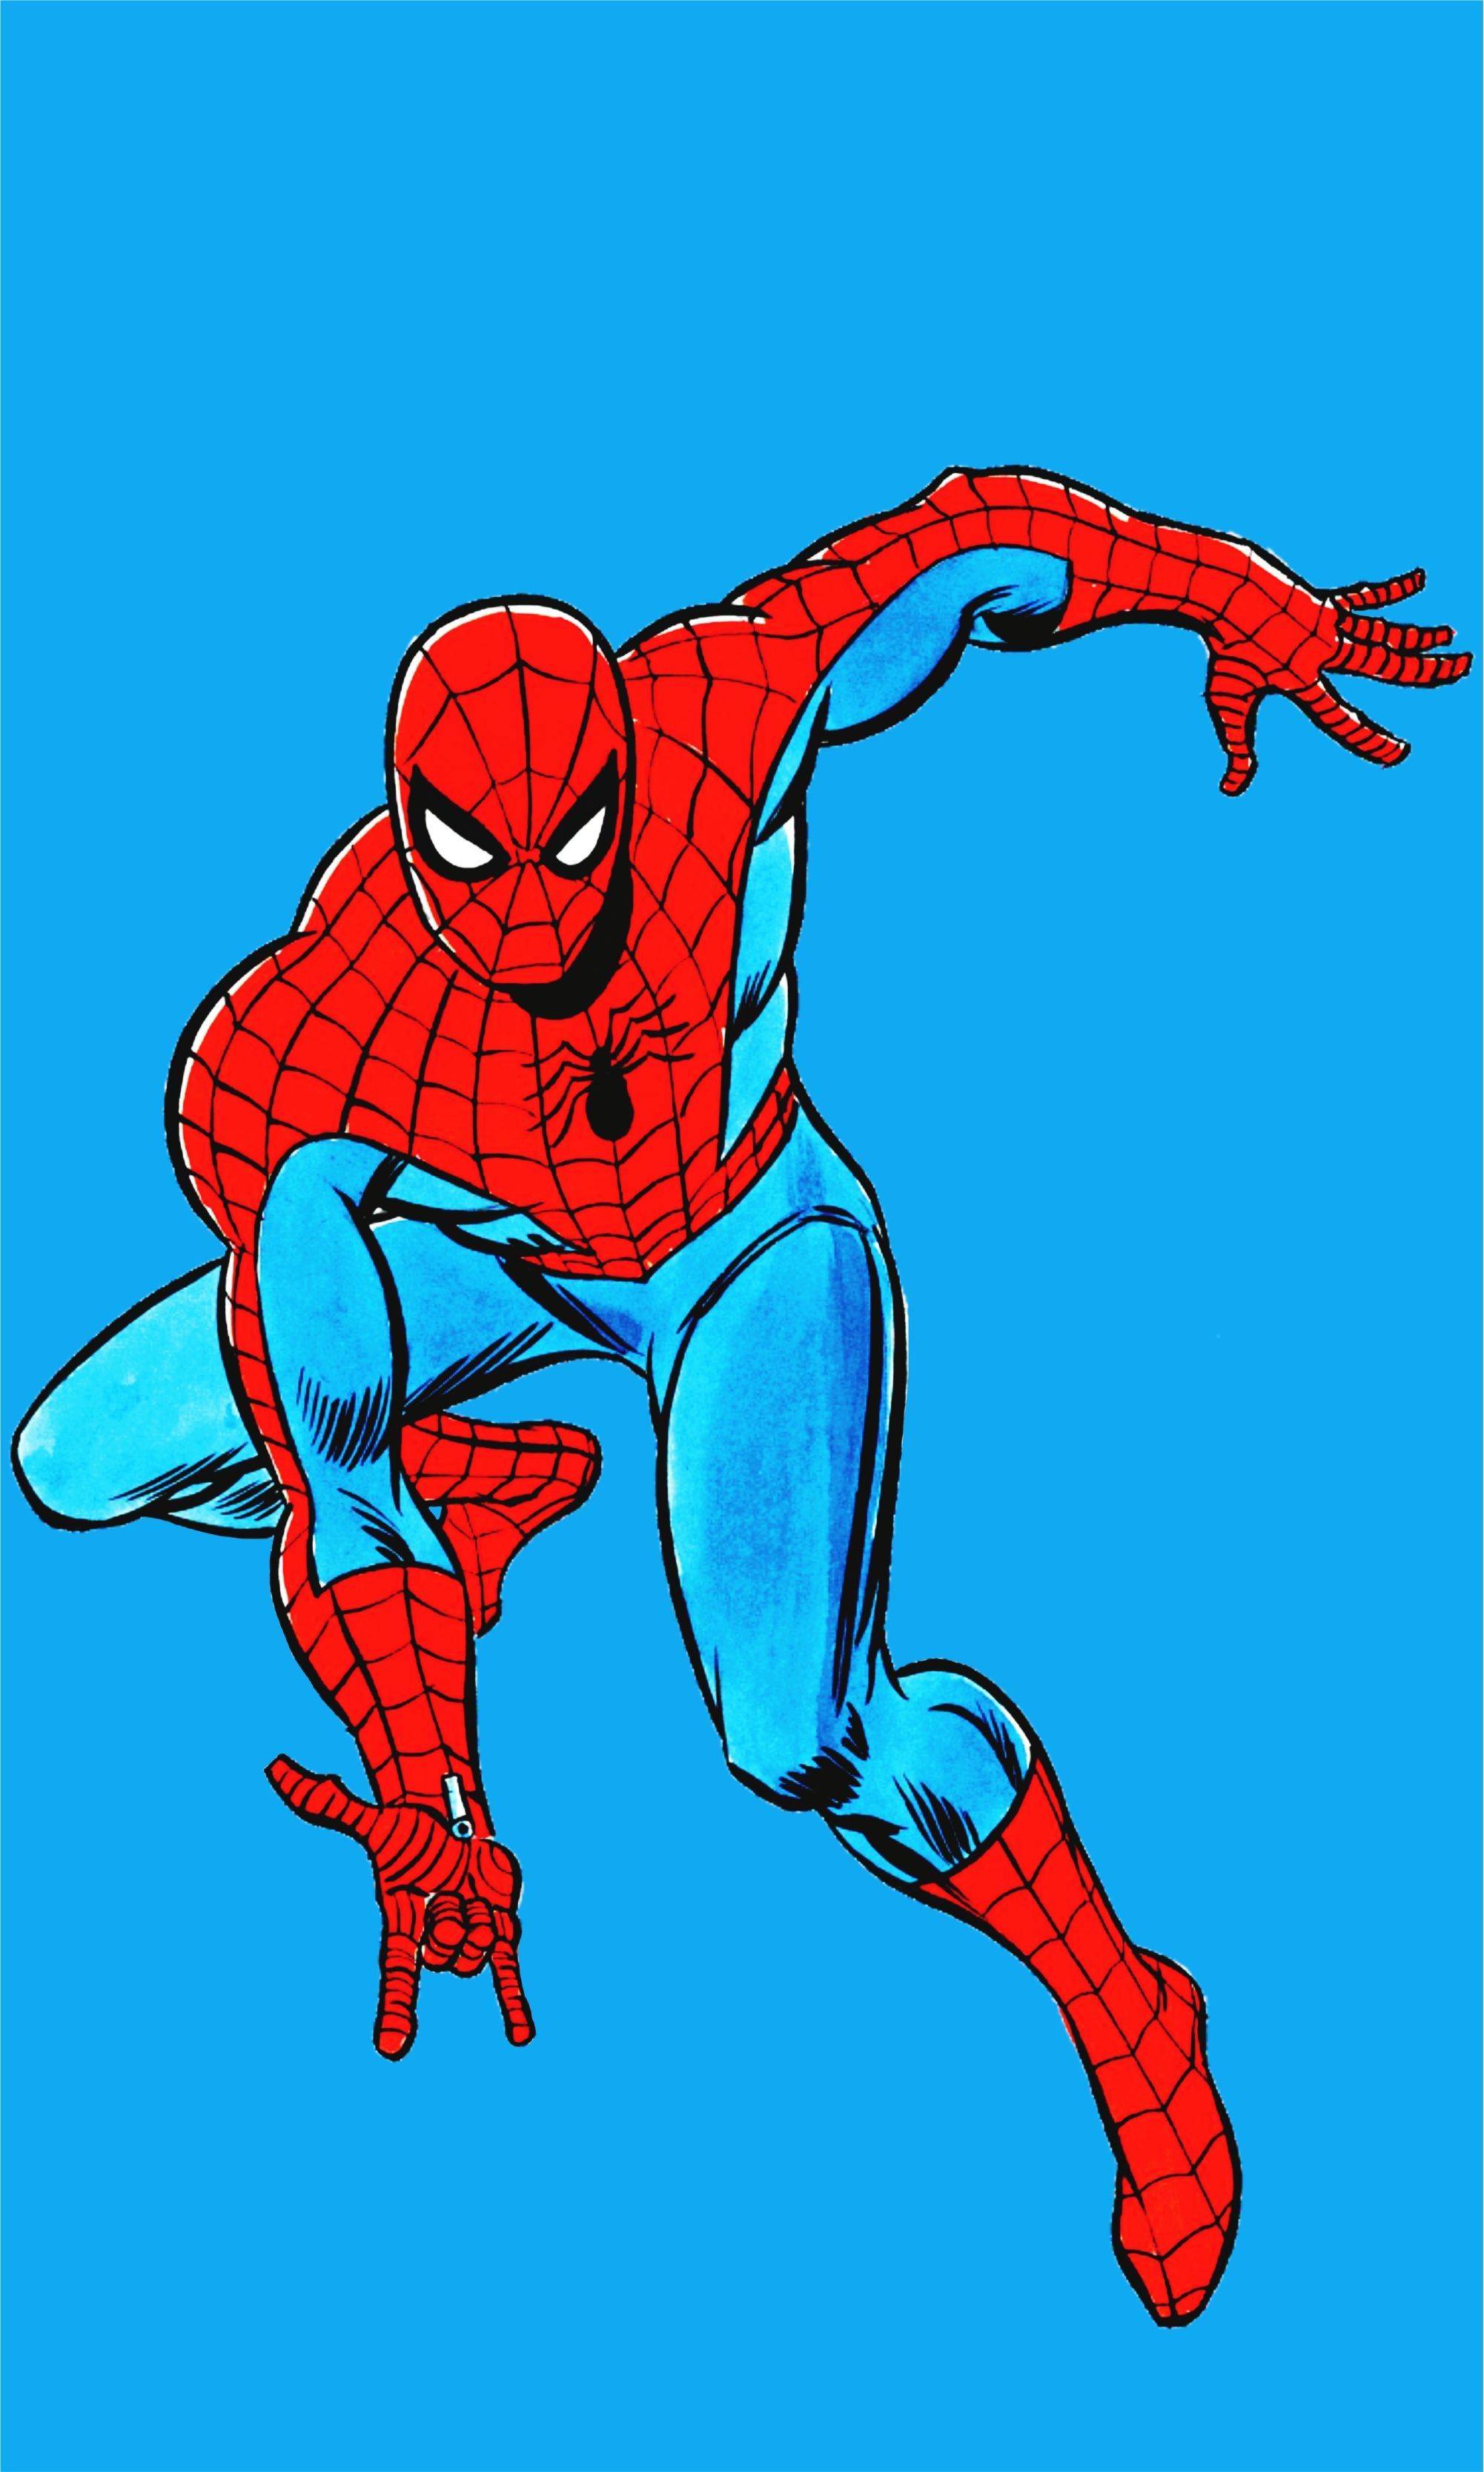 Classic Spider-Man Wallpapers on WallpaperDog